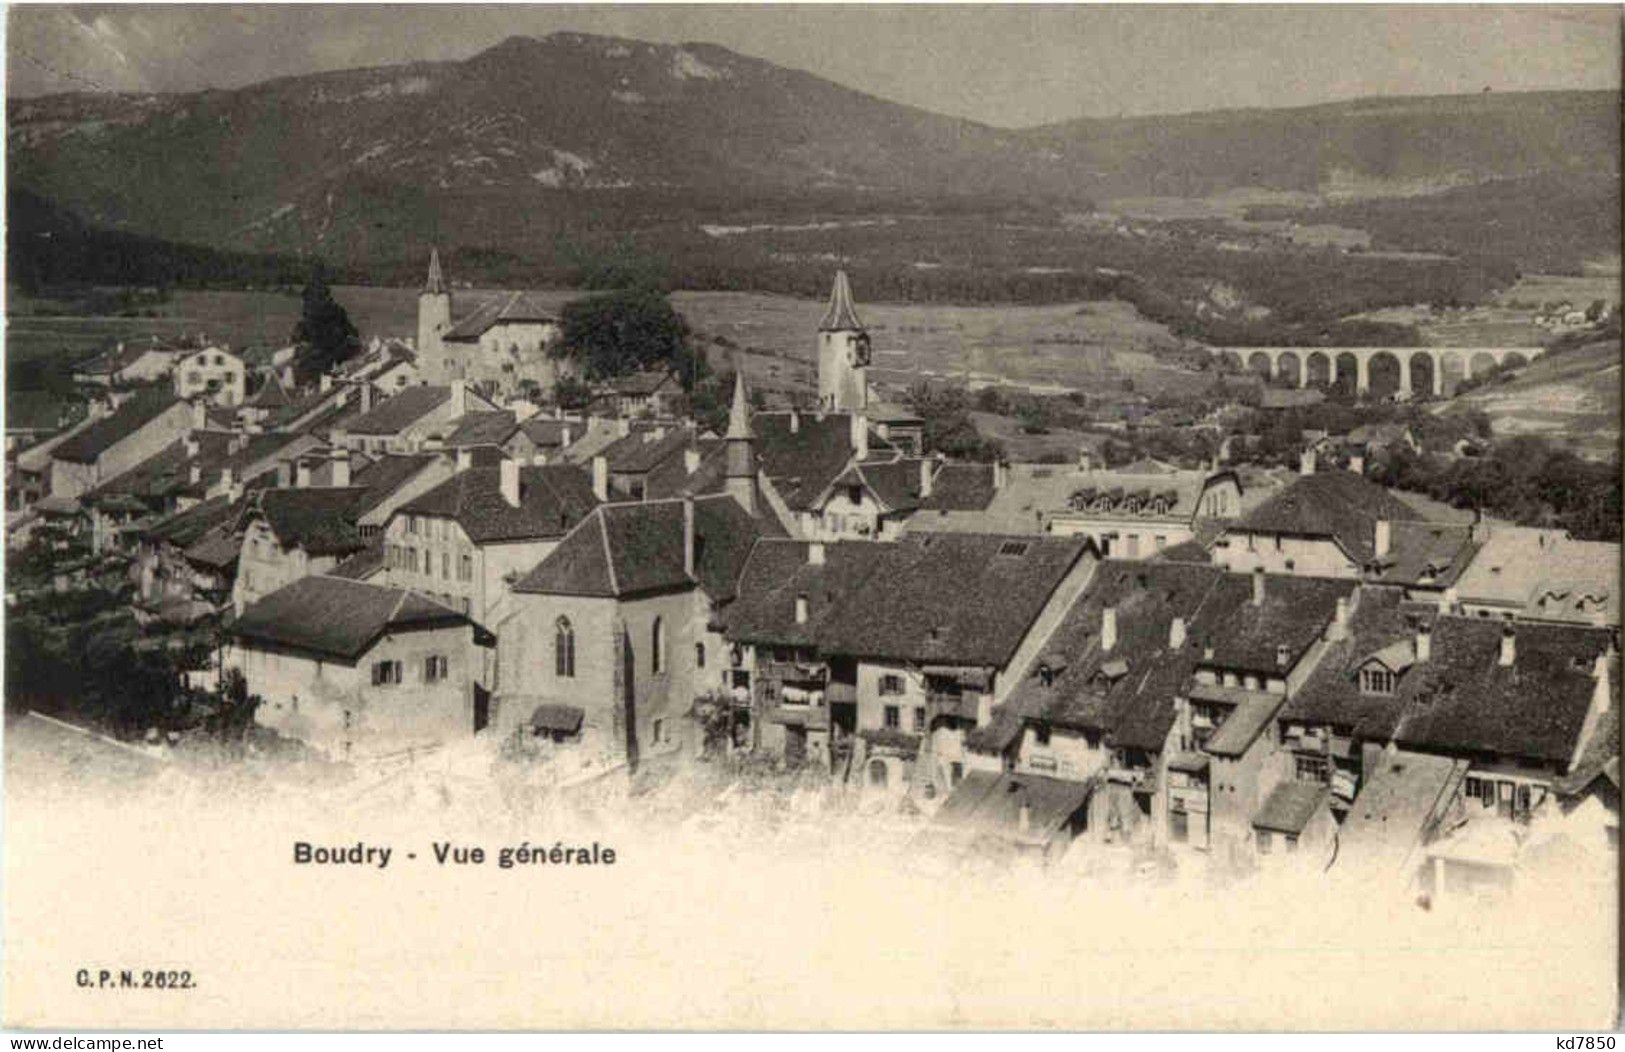 Boudry - Boudry